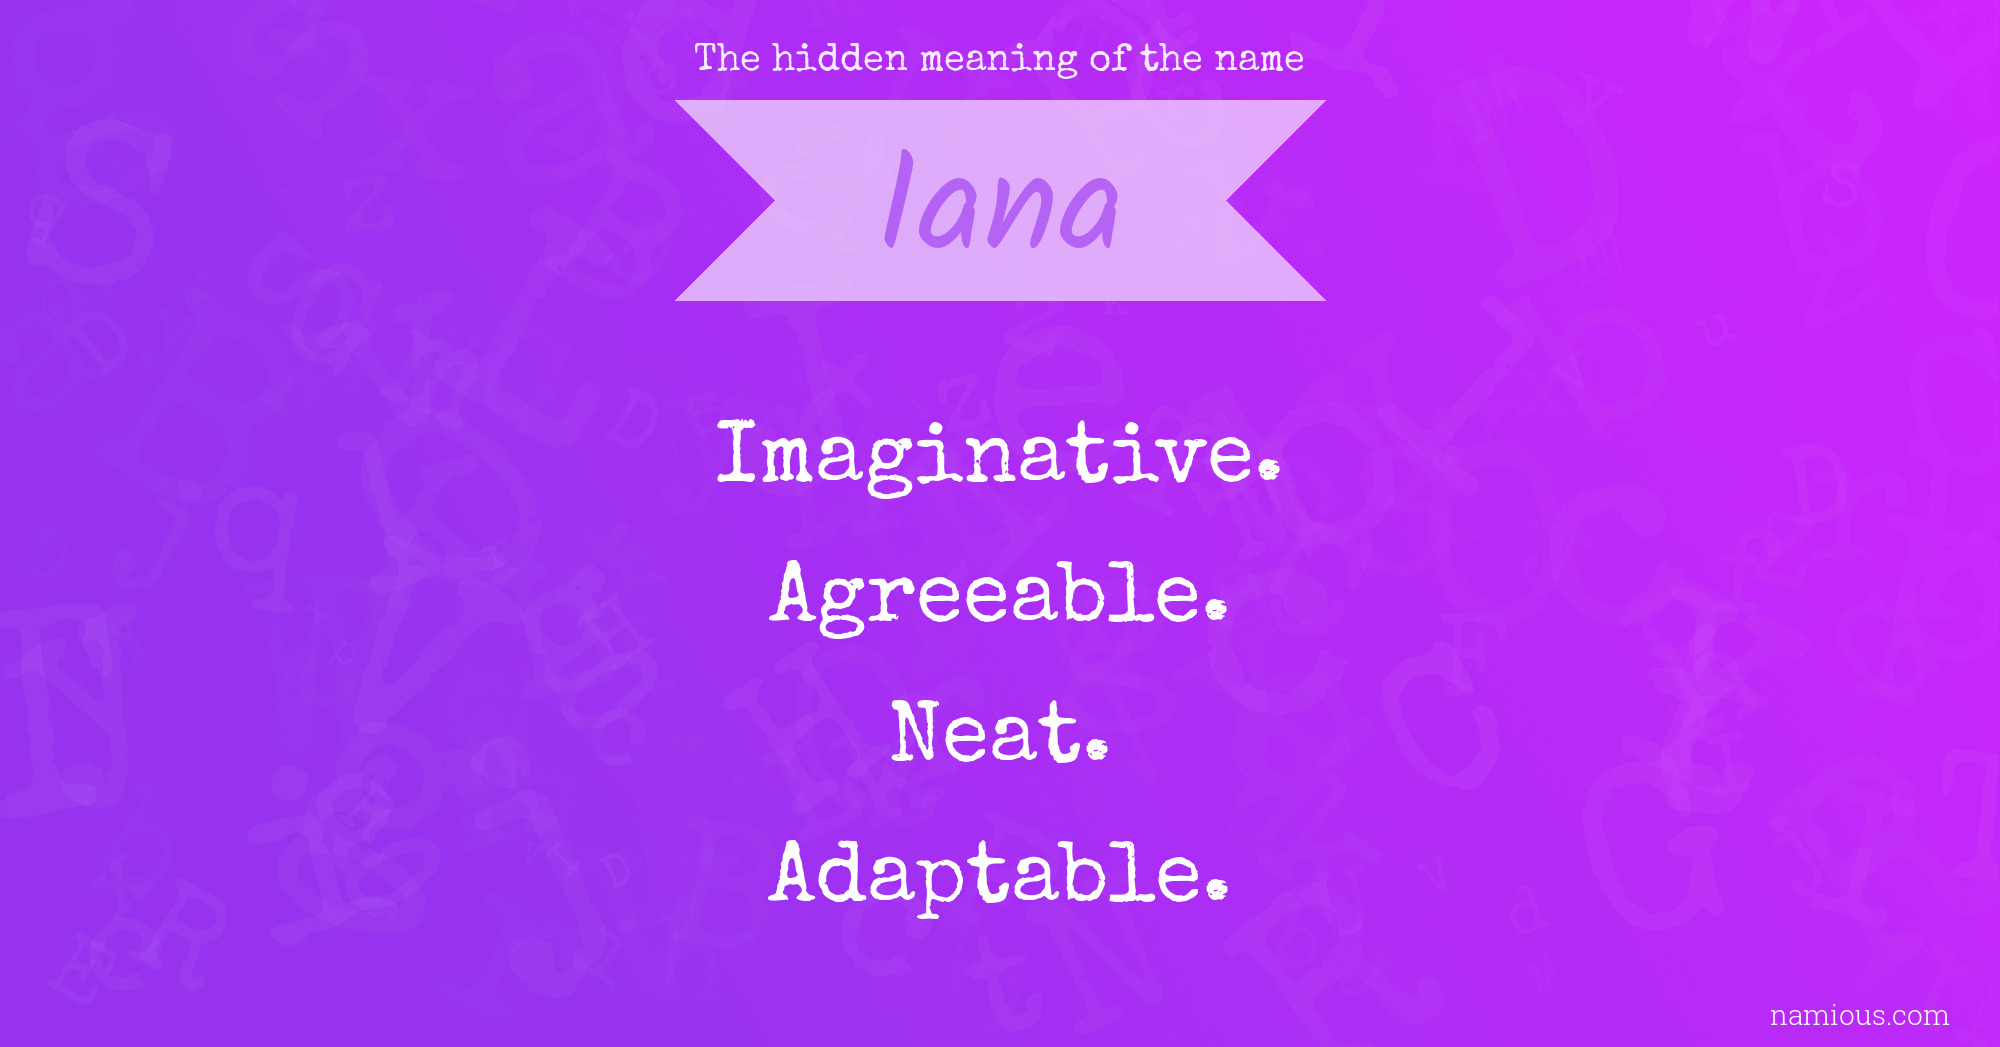 The hidden meaning of the name Iana